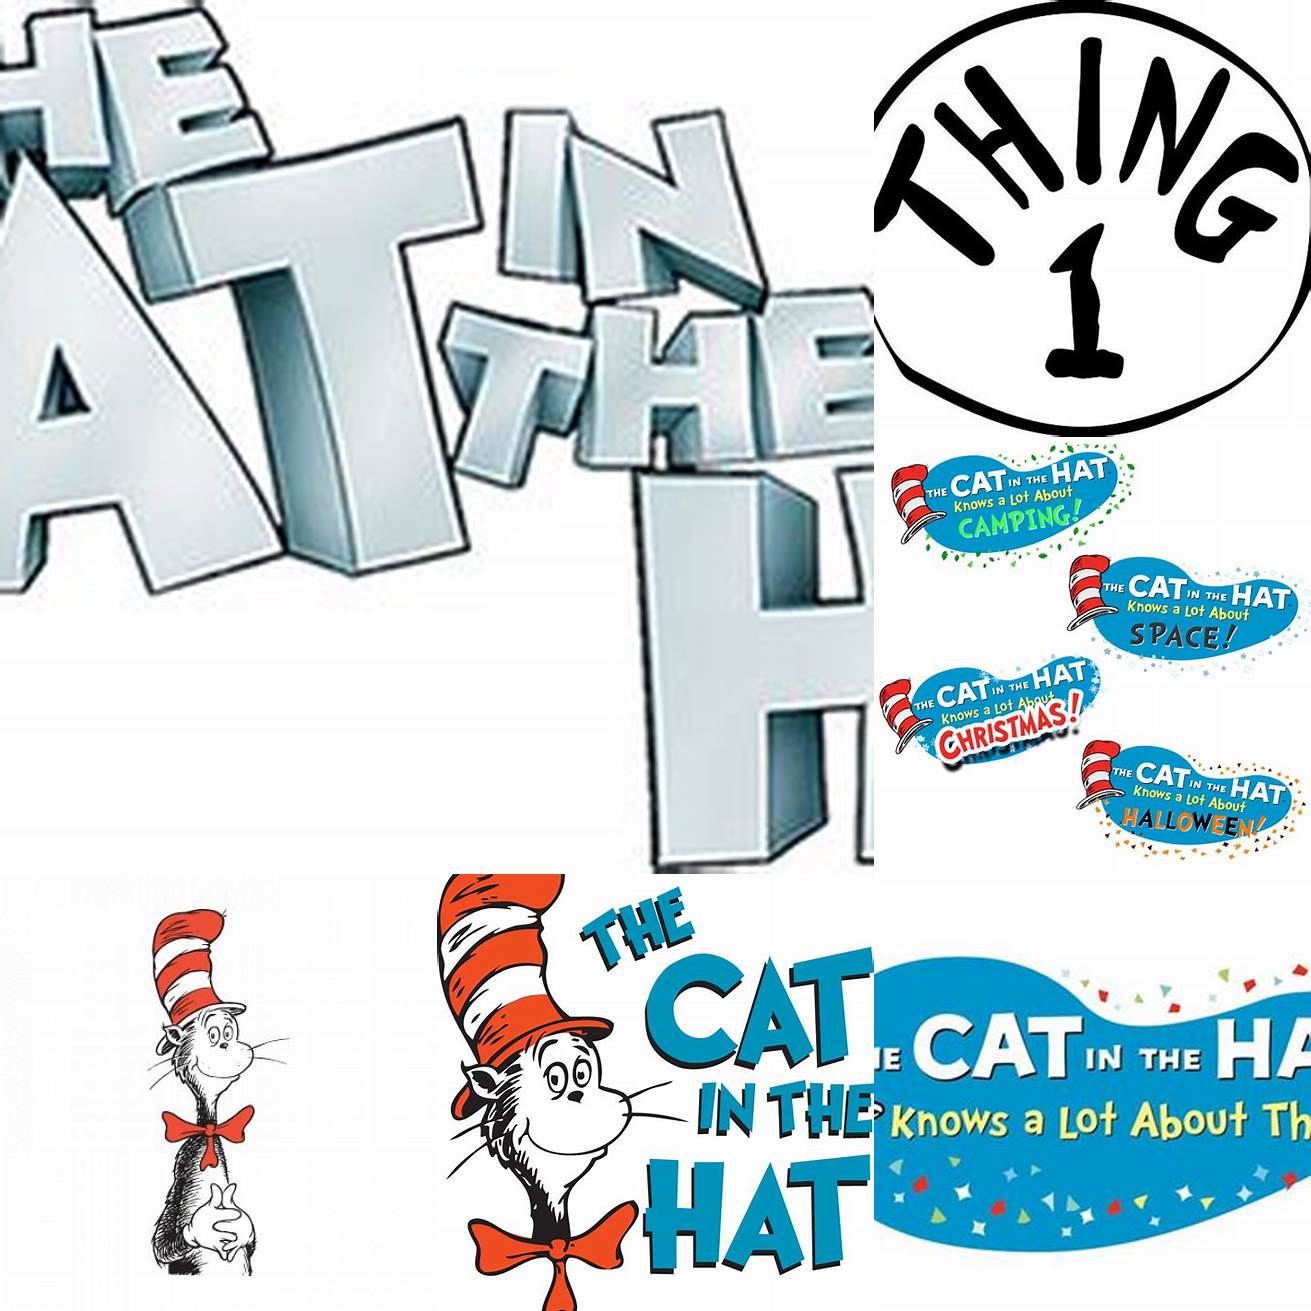 The Cat in the Hat Logo on a Baby Onesie